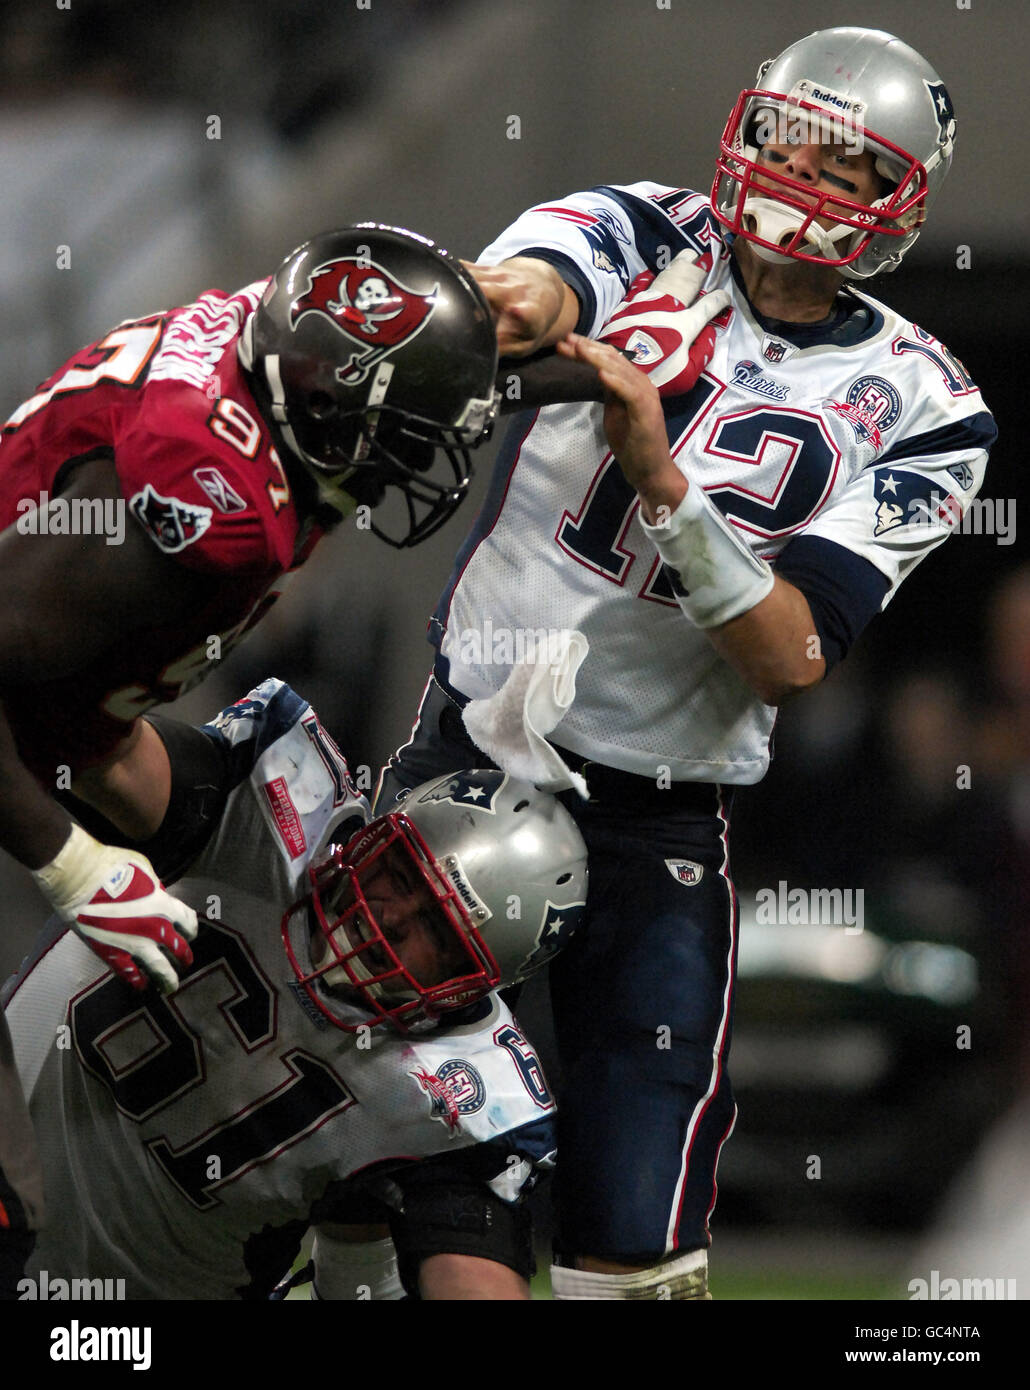 New England Patriots' Tom Brady (right) passes as teammate Stephen Neal (bottom) blocks a tackle from Tampa Bay Buccaneers' Jimmy Wilkerson (left) during the NFL match at Wembley Stadium, London. Stock Photo